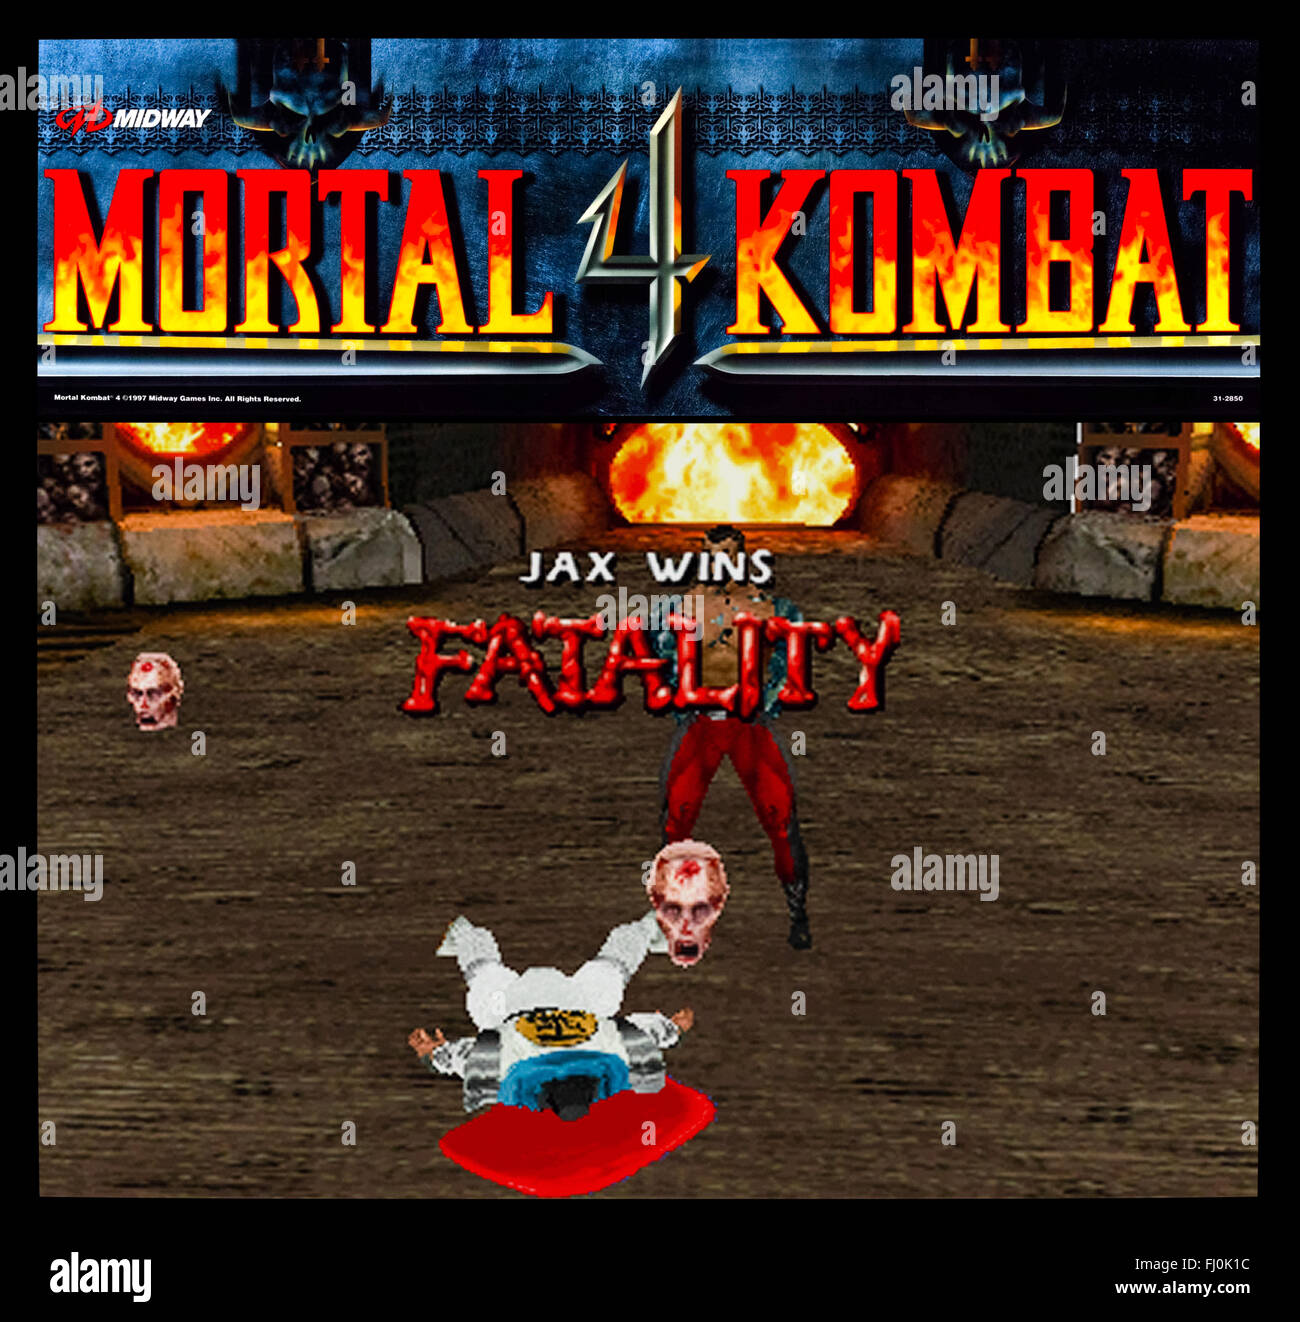 'Mortal Kombat 4' released in 1997 by Midway Games, another sequel to the original Mortal Kombat introduced 3D computer graphics and the use of weapons and other object in gameplay.  See description for more information. Stock Photo